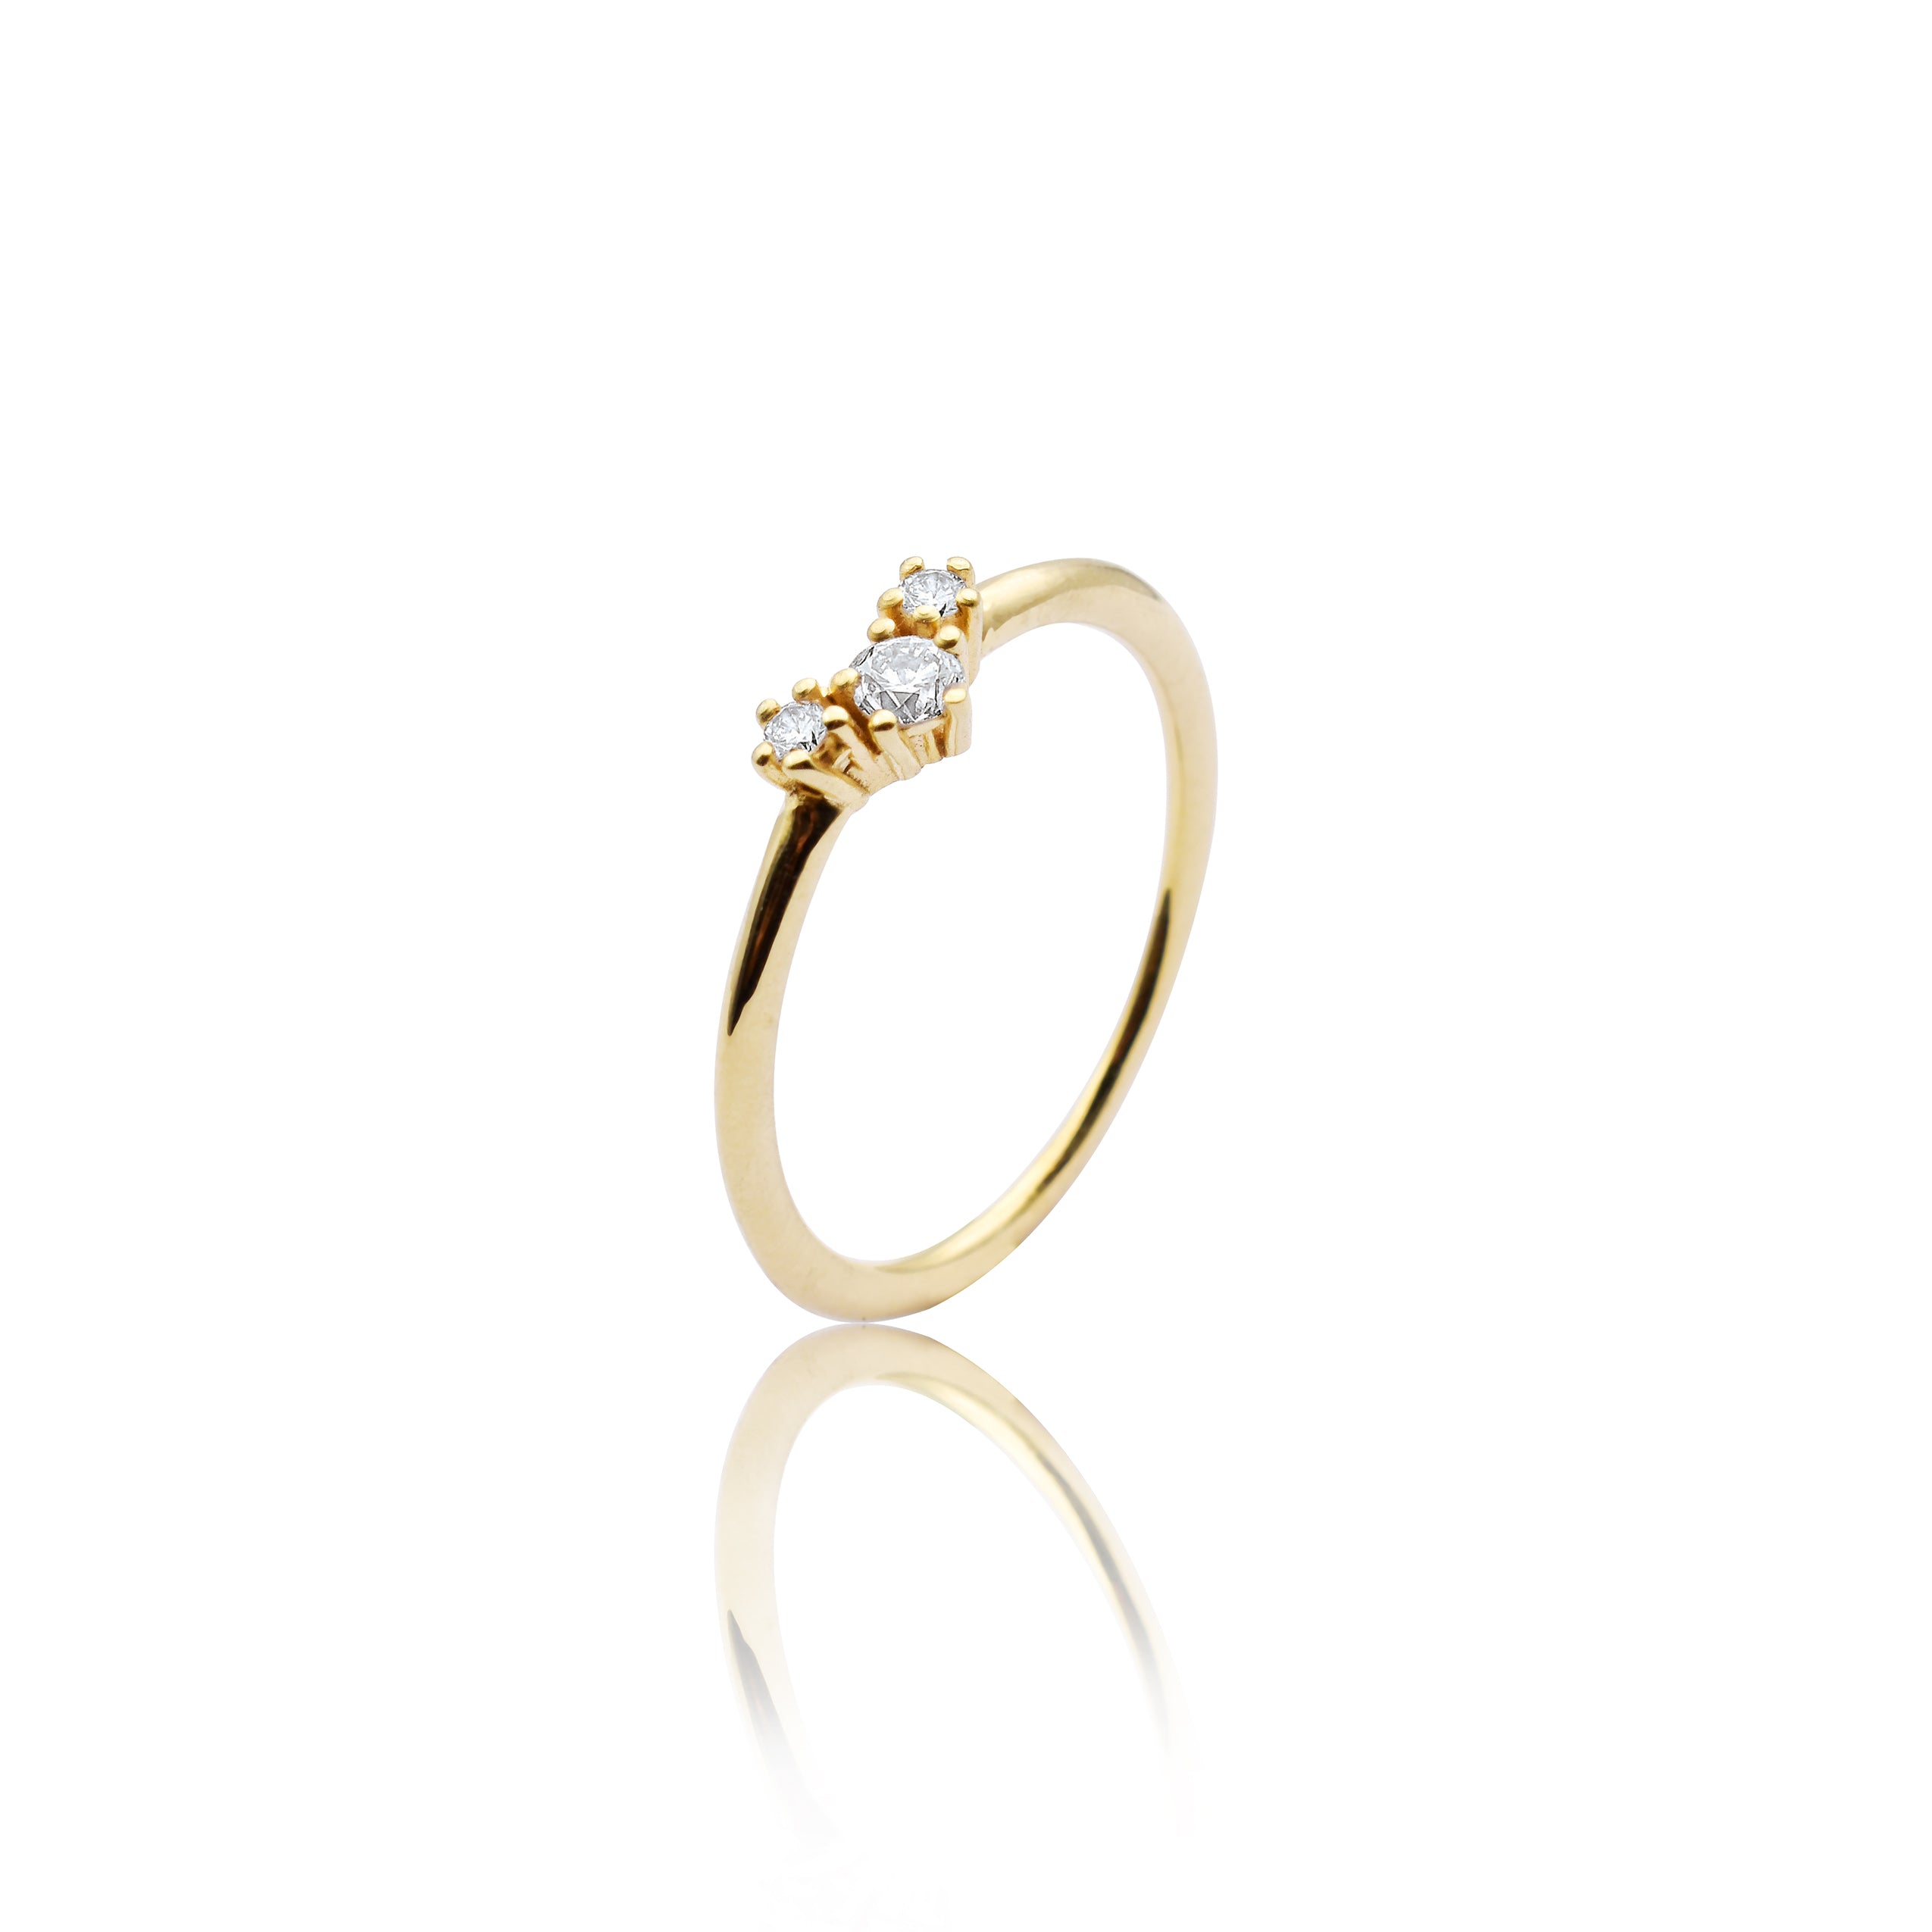 Sparkle ring "smal" in 585/- gold with 3 brilliant-cut diamonds